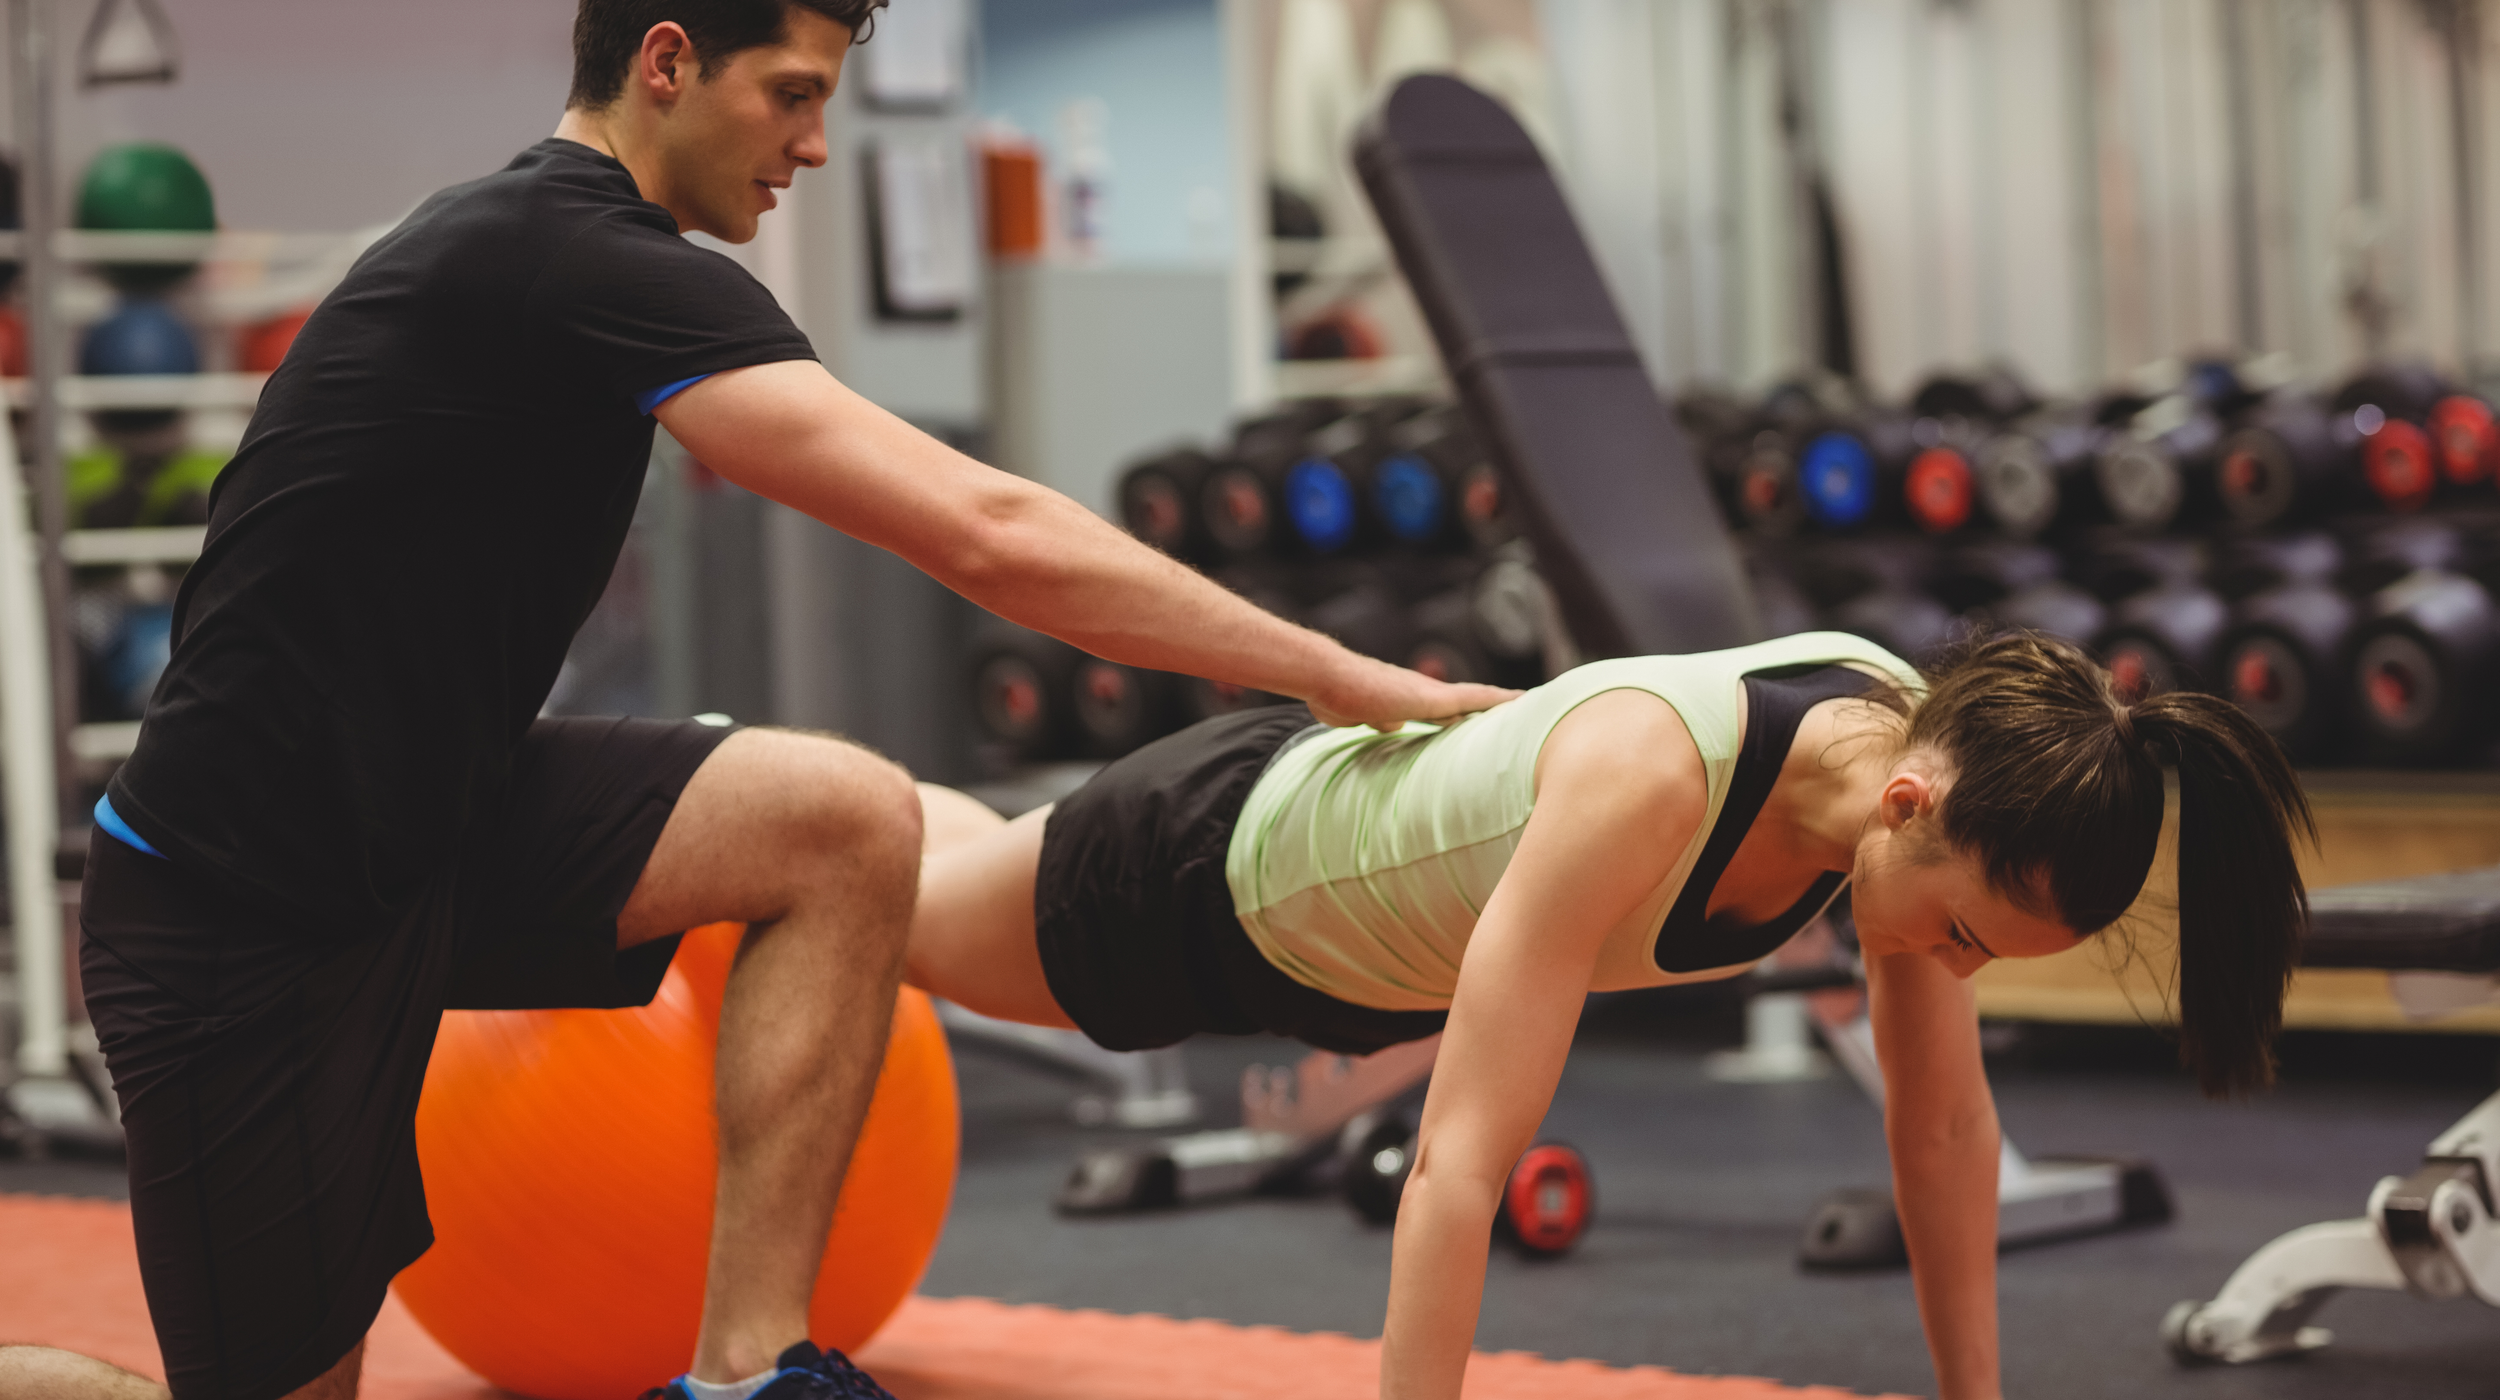 How to Get Started as a Personal Trainer